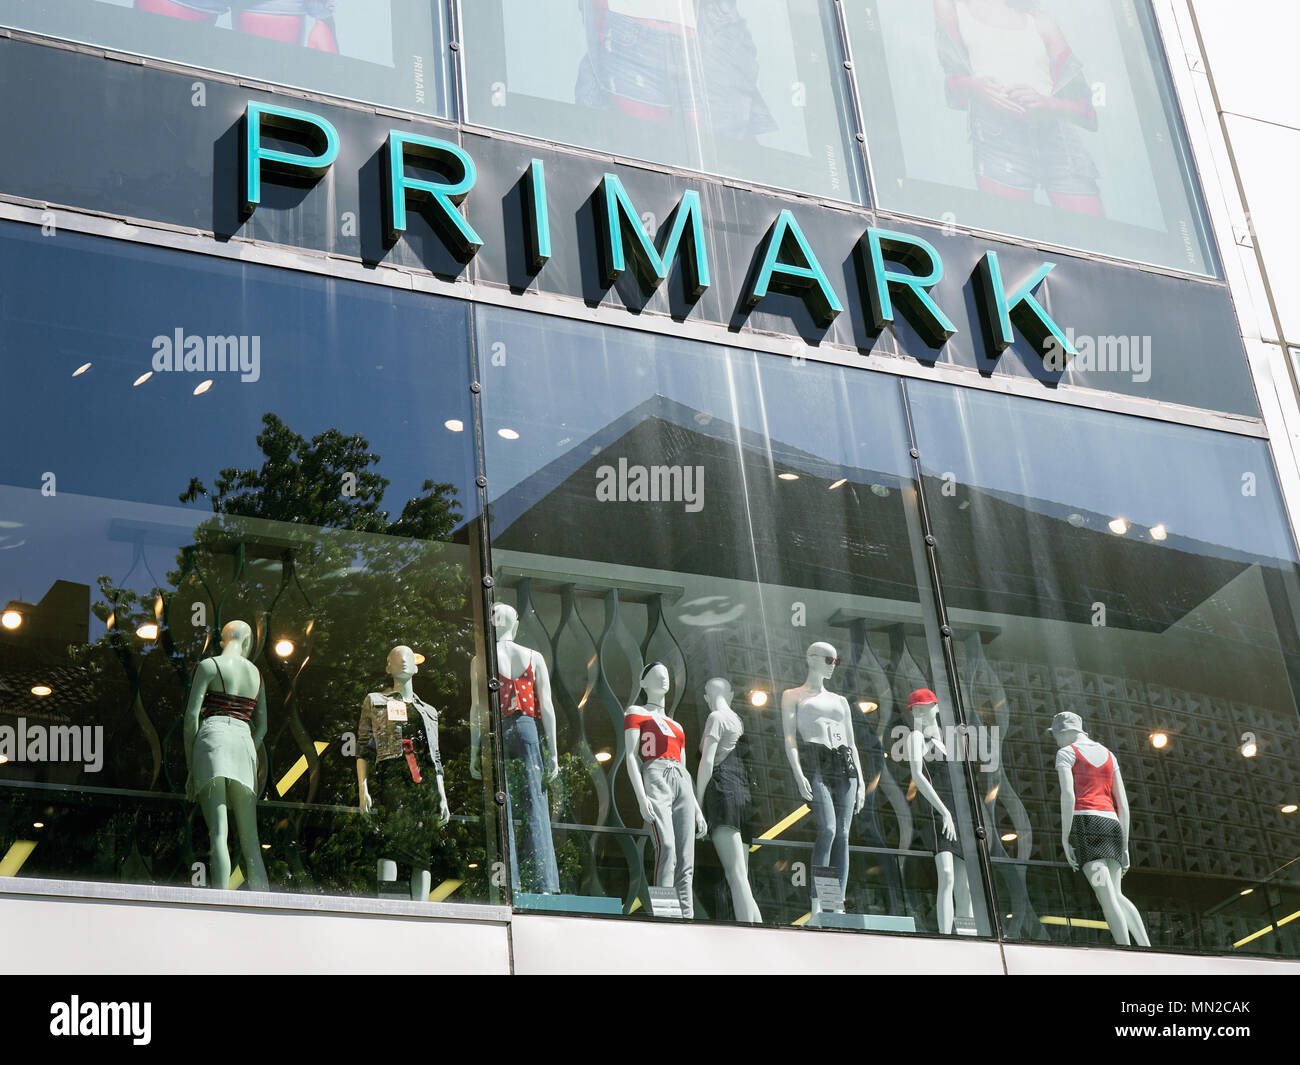 Hannover, Germany - May 7, 2018: Primark logo sign on storefront above shop window mannequins presenting their brand of fast fashion. Stock Photo